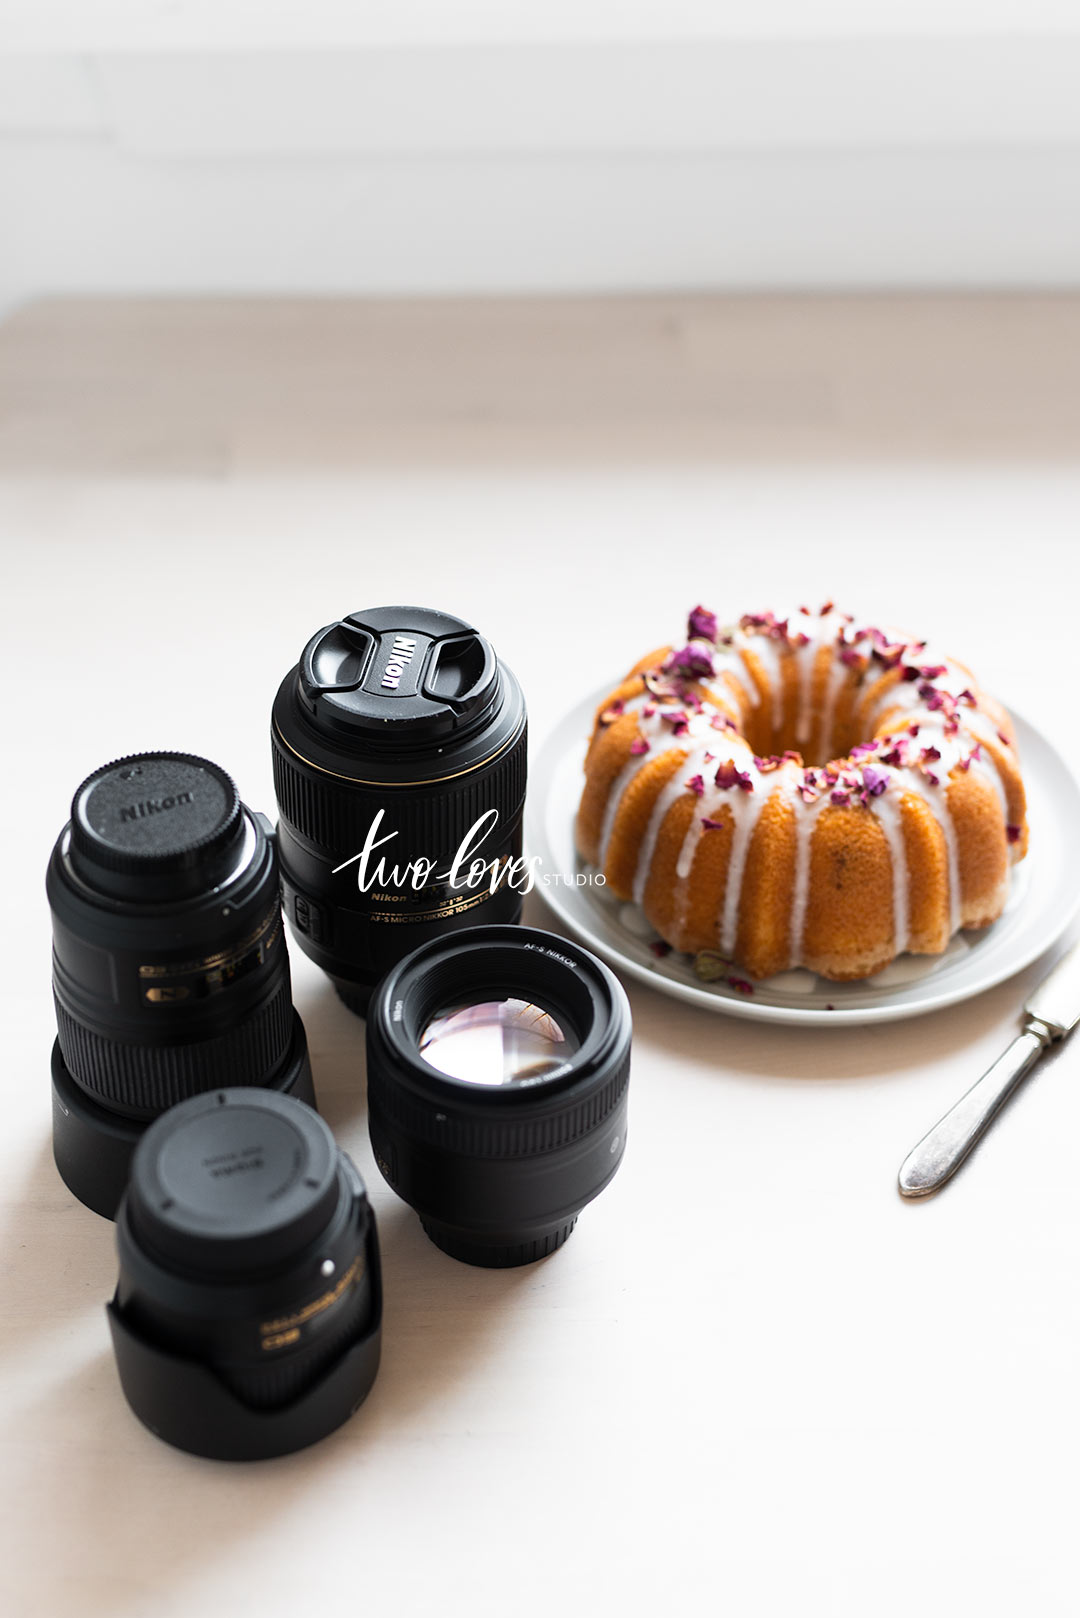 Trying to work out which is the best camera for food photography? Get these 10 tips to help you decide.